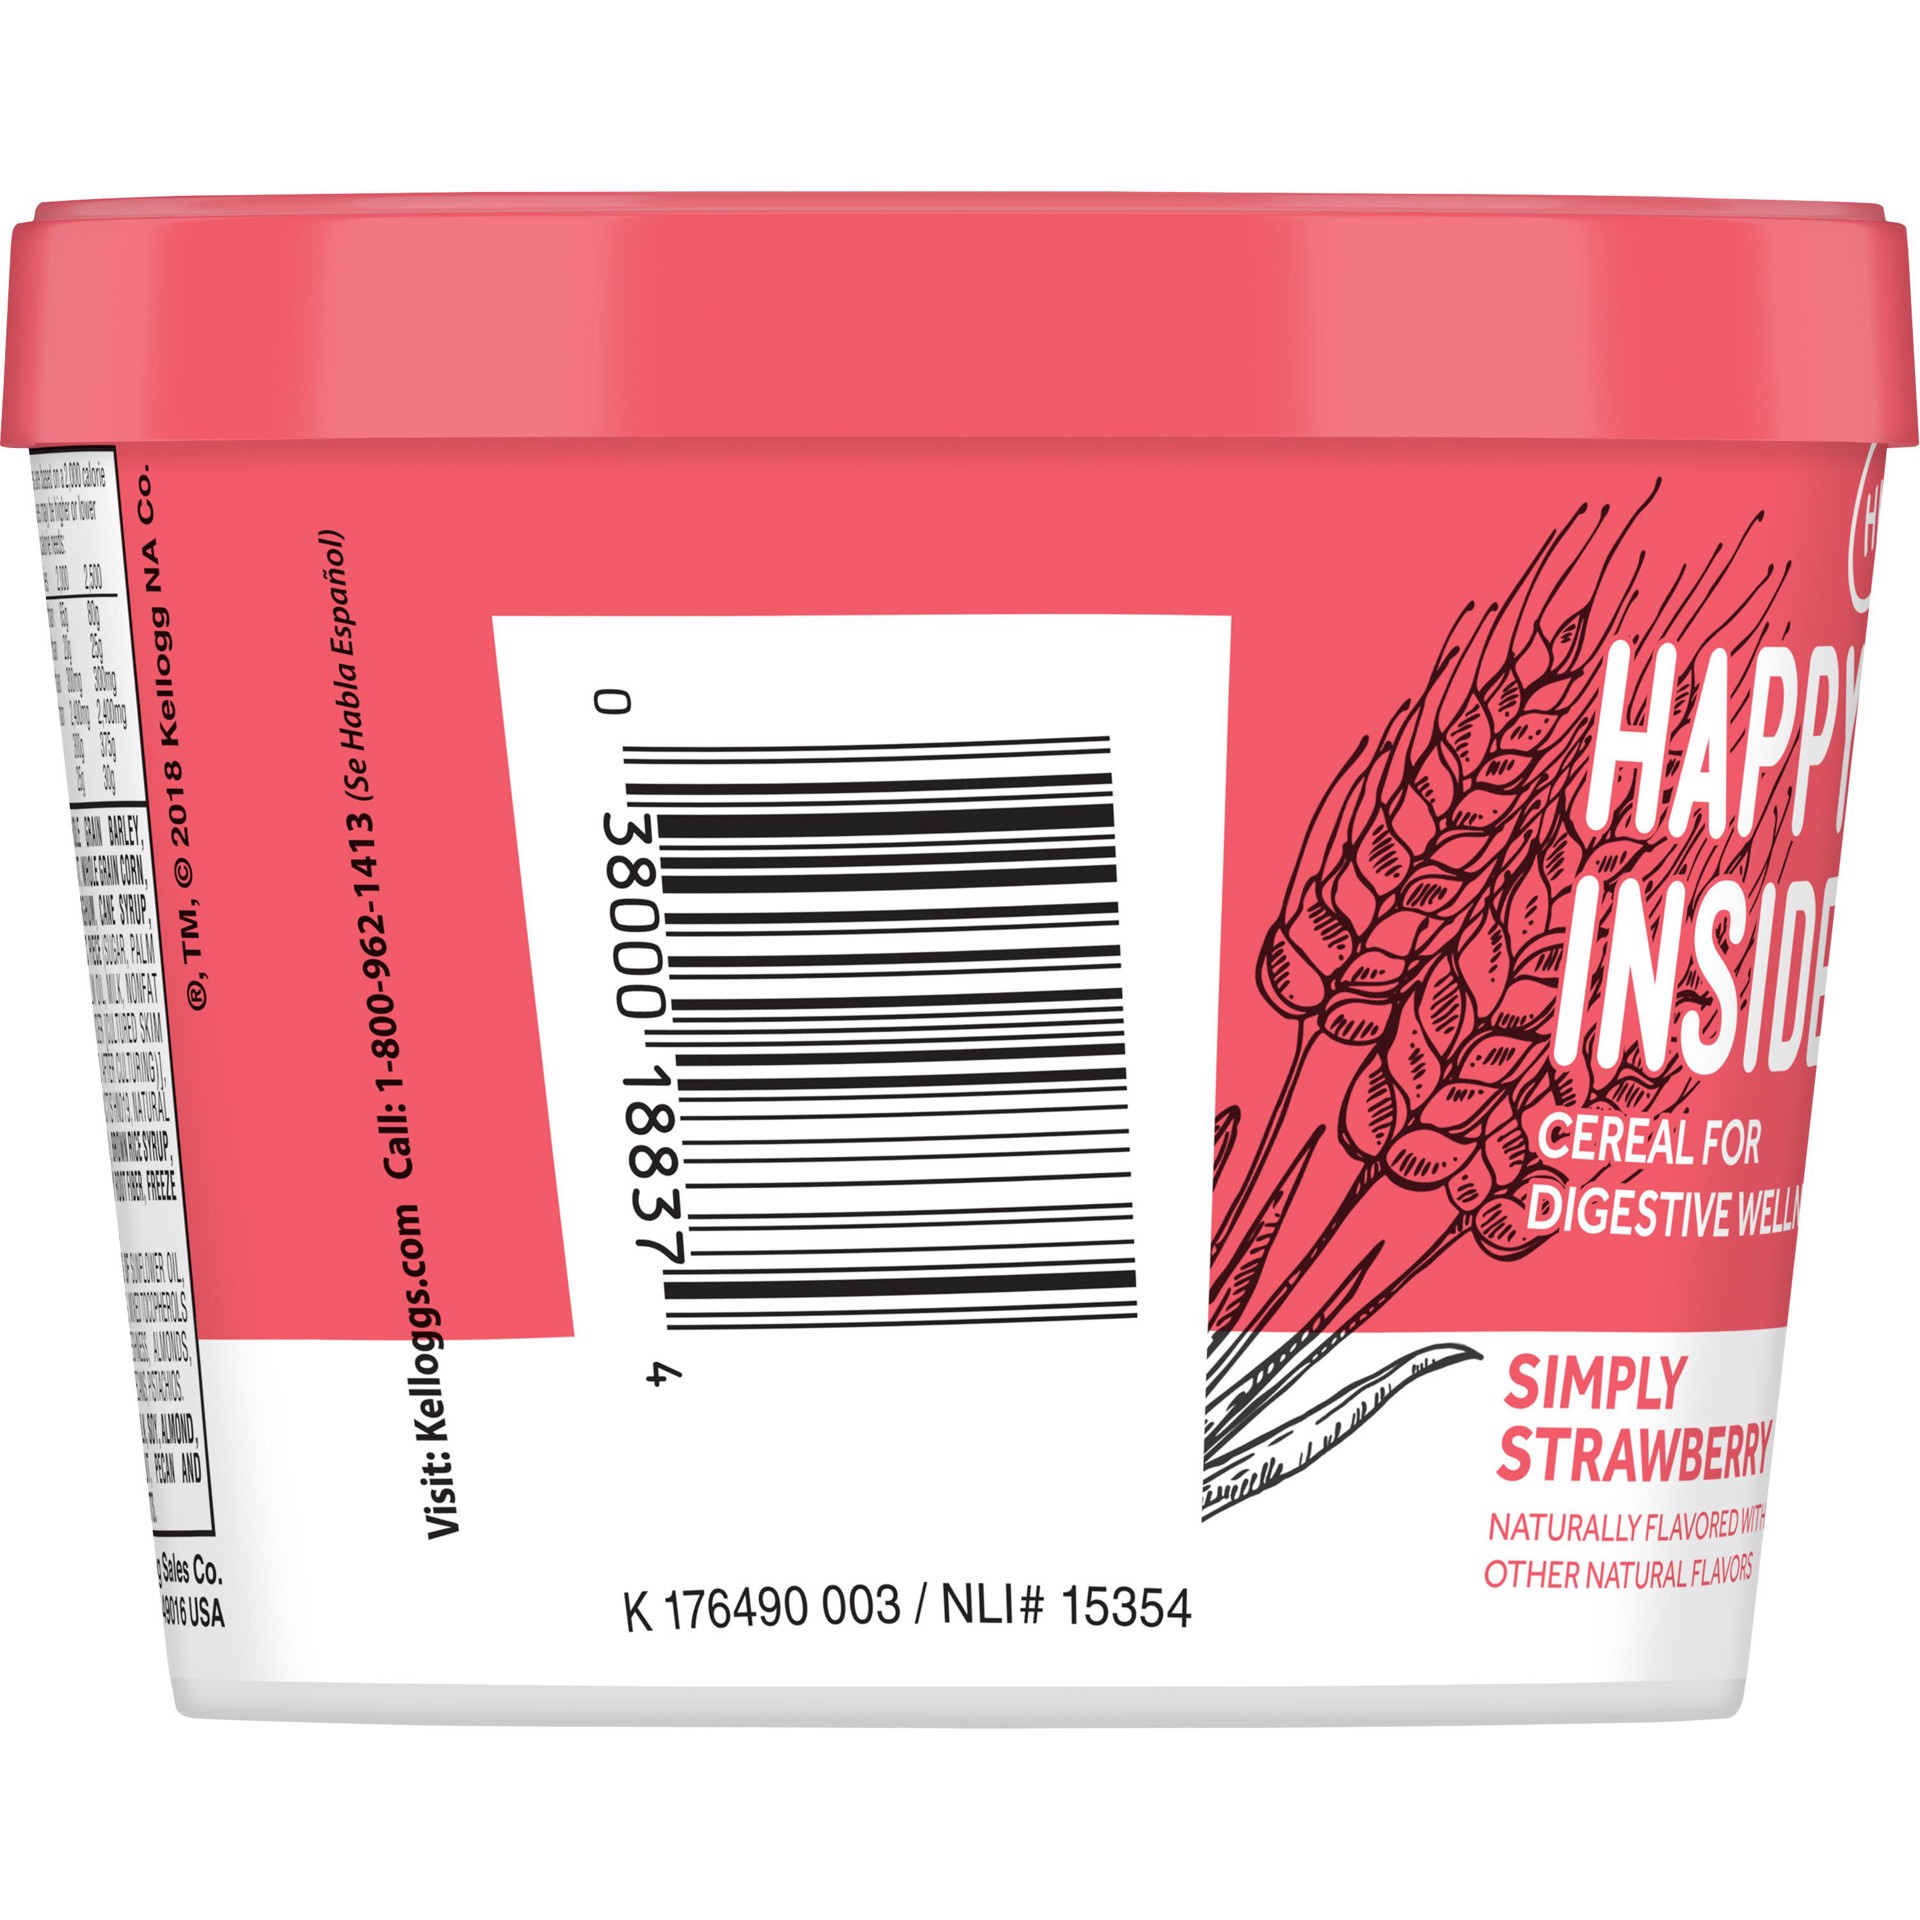 slide 5 of 5, HI! Happy Inside, Breakfast Cereal, Simply Strawberry, with Prebiotics, Probiotics and Fiber for Digestive Wellness, Non-GMO, 1.94oz Cup, 1.94 oz